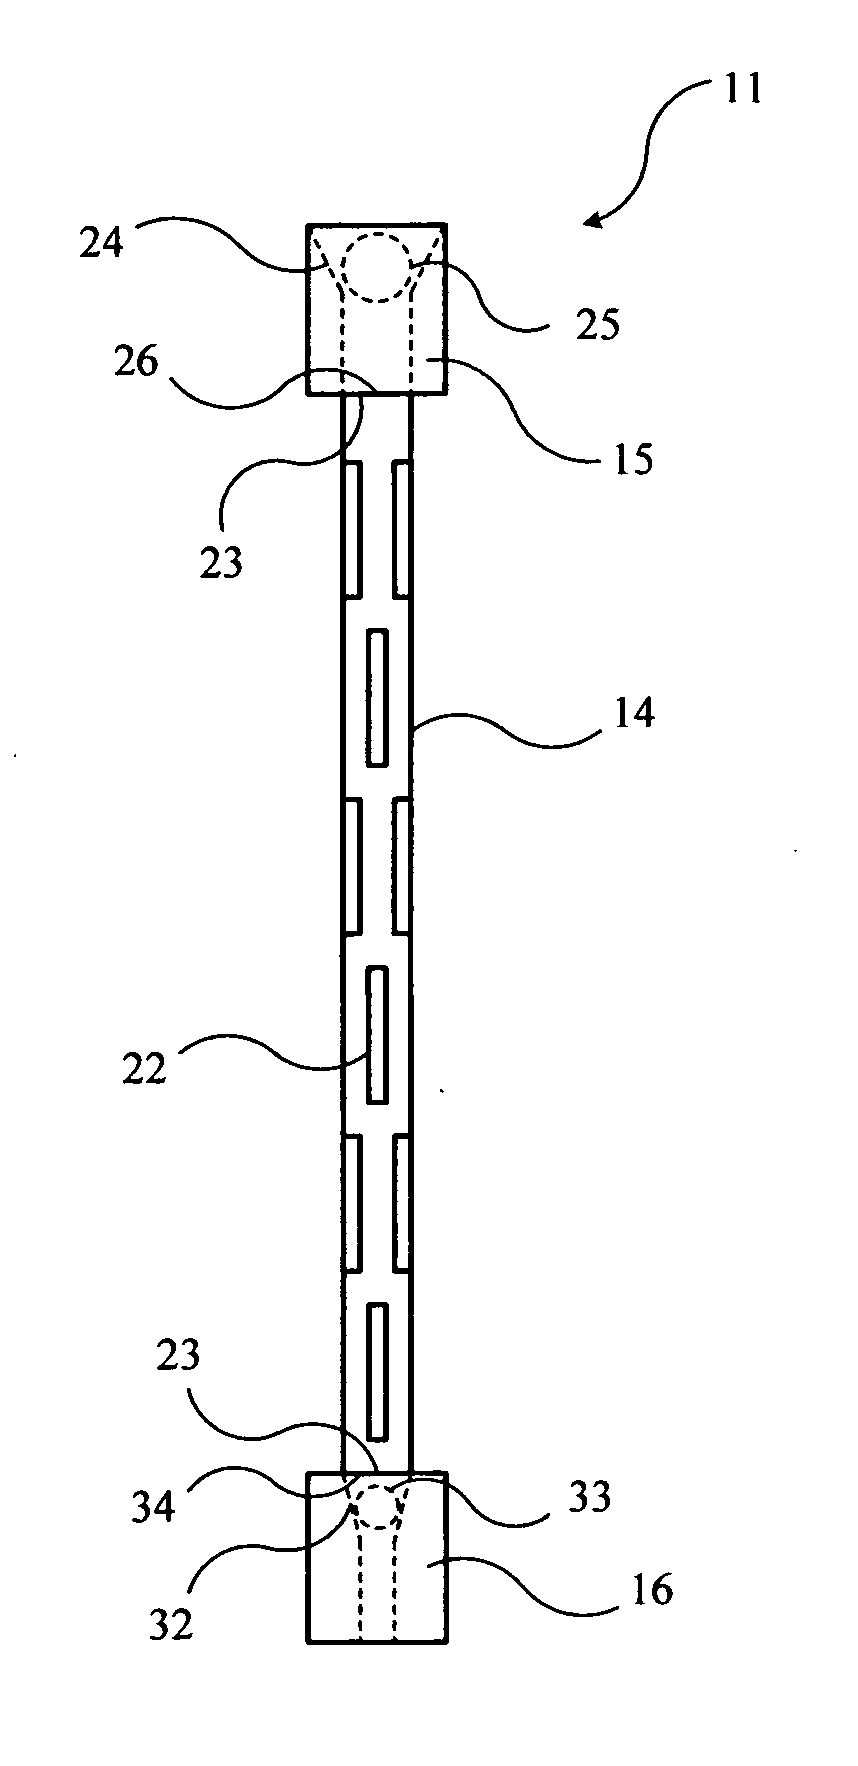 Apparatus and method for isolating flow in a downhole tool assembly